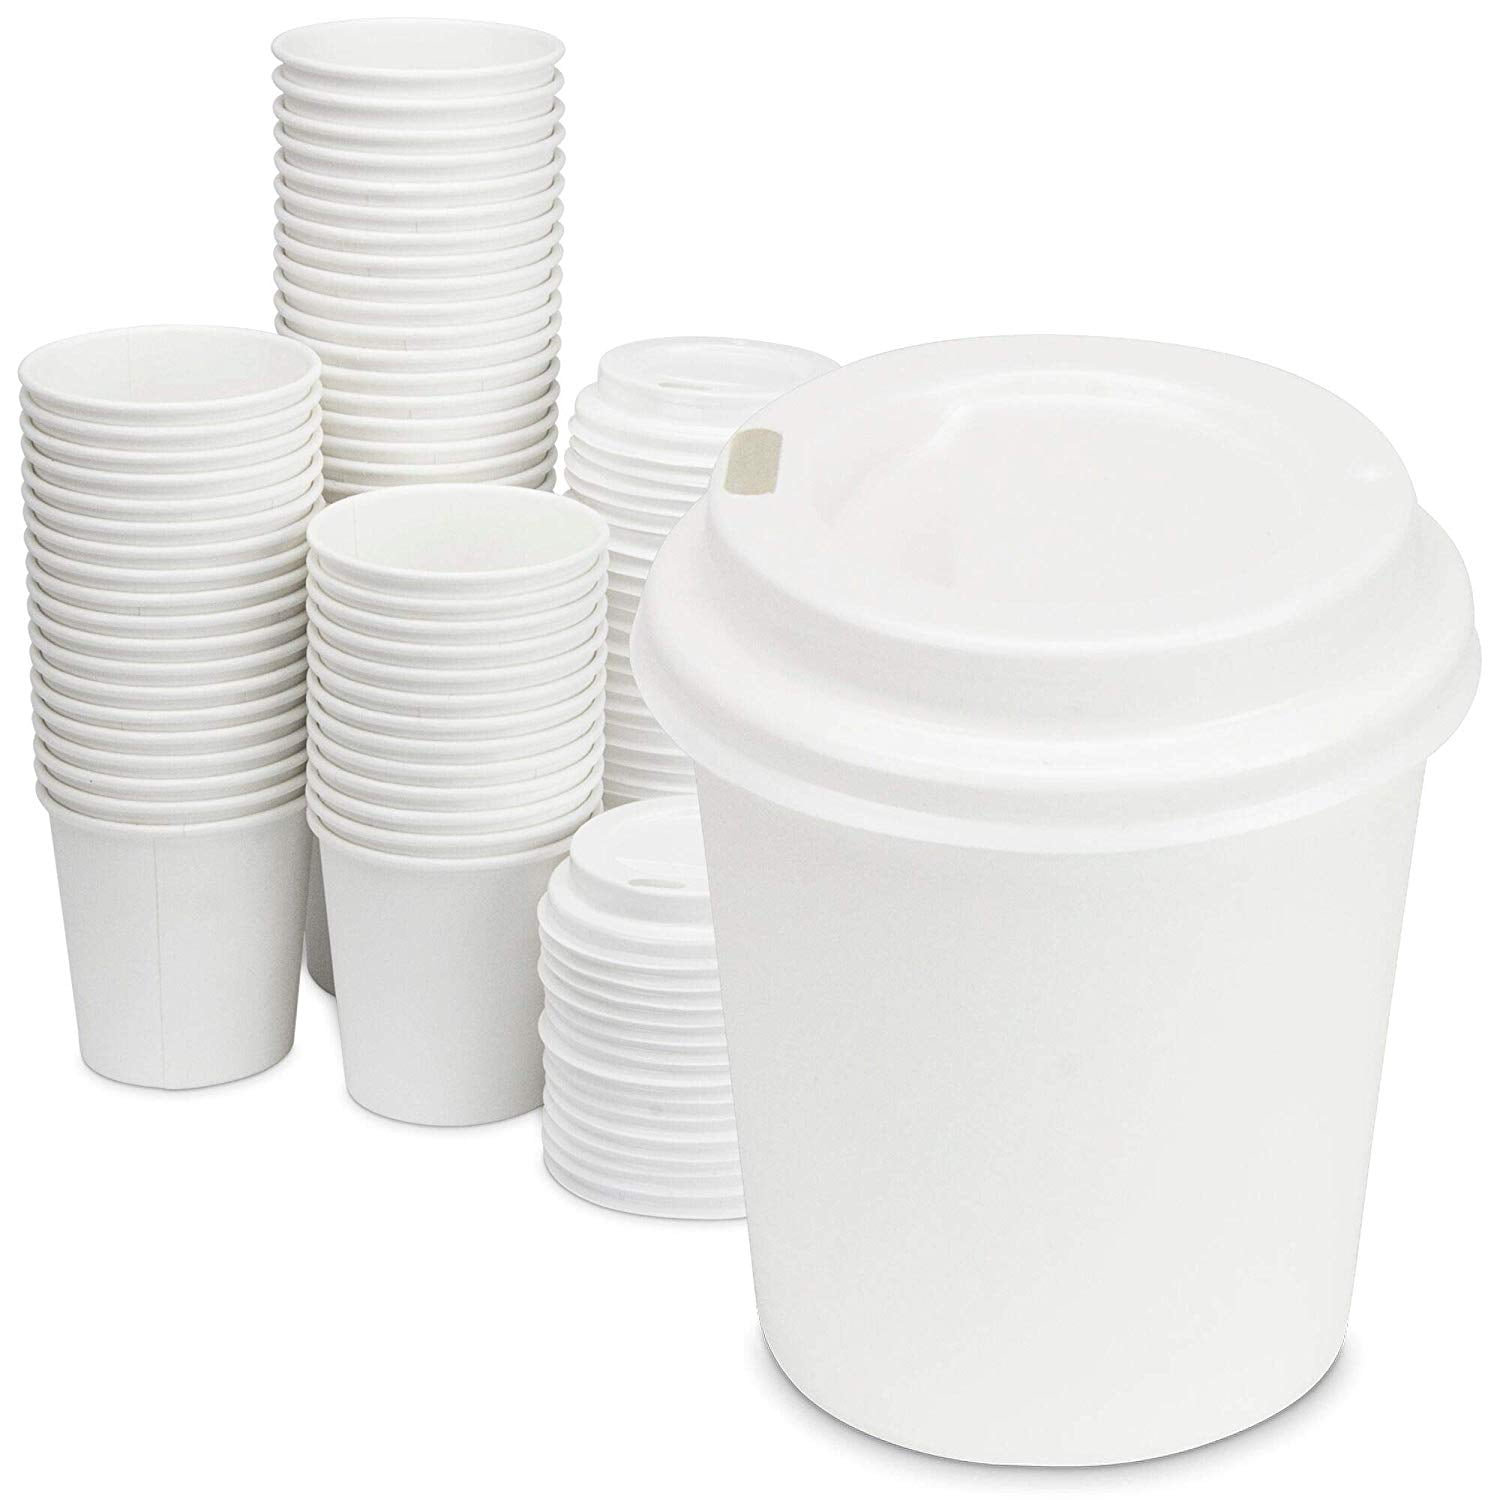 50 ct 6 oz All-Purpose White Paper Cups hot Beverage Cup for Coffee Tea... 